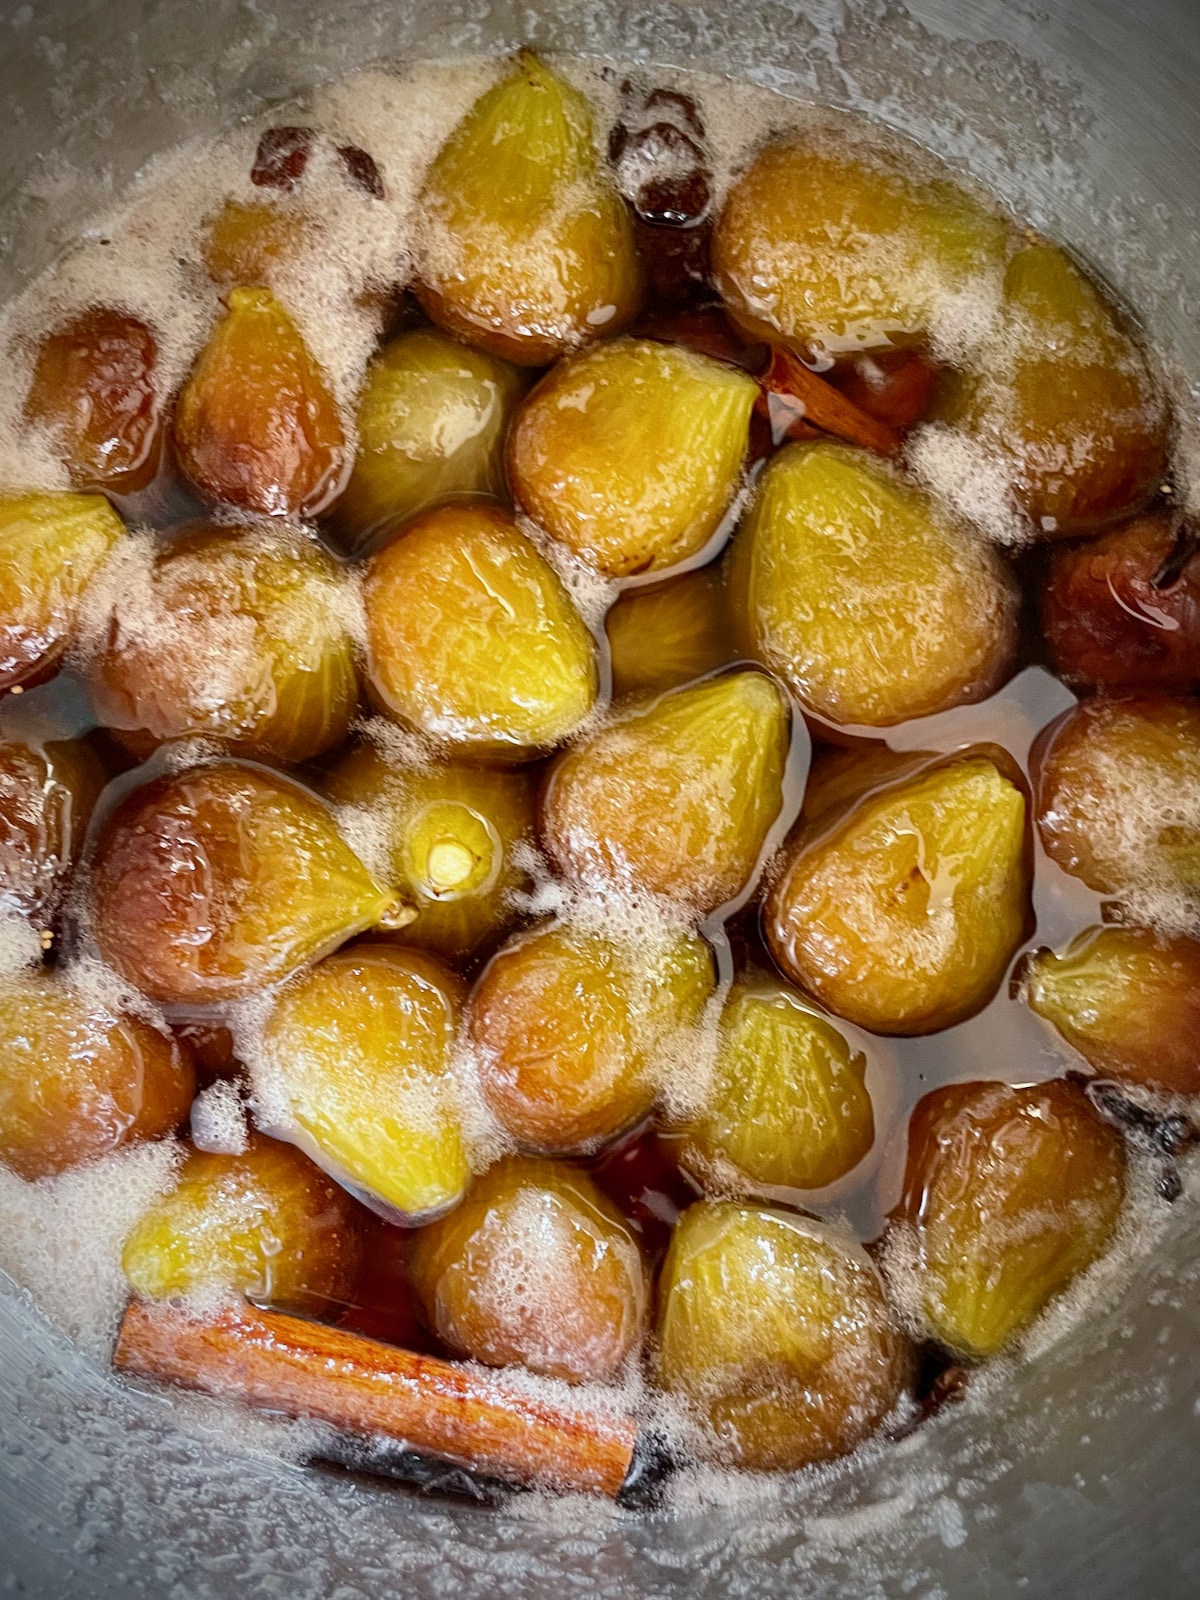 Pickled figs steeping